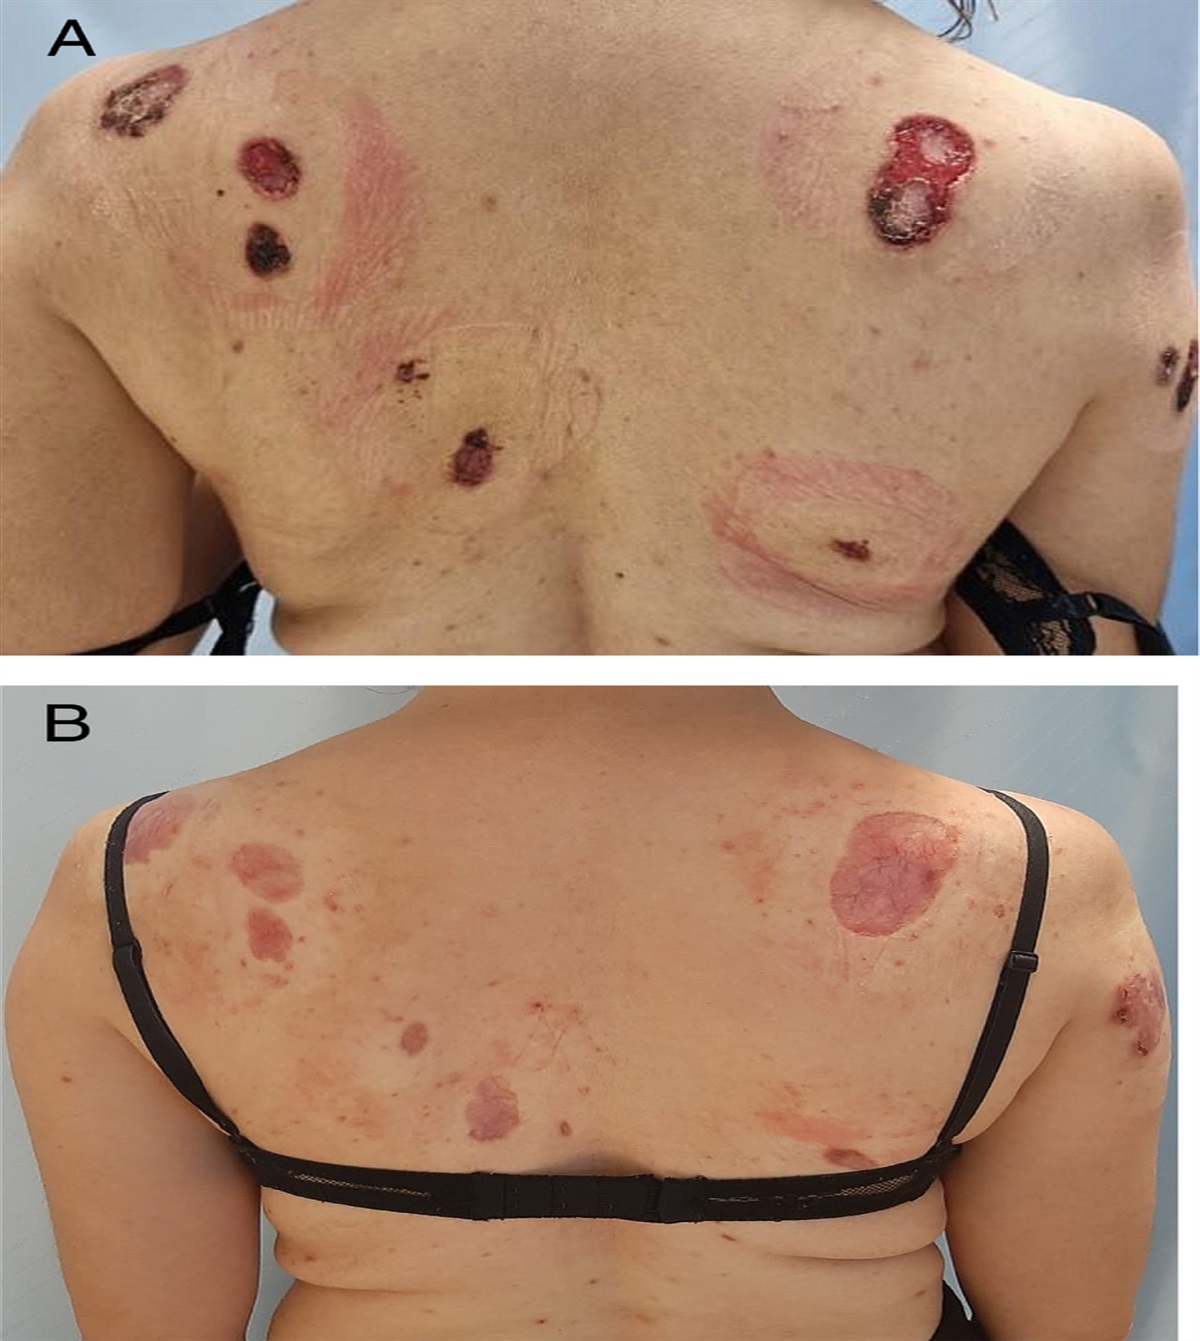 Risankizumab as a Therapeutic Approach for Recalcitrant Pyoderma Gangrenosum